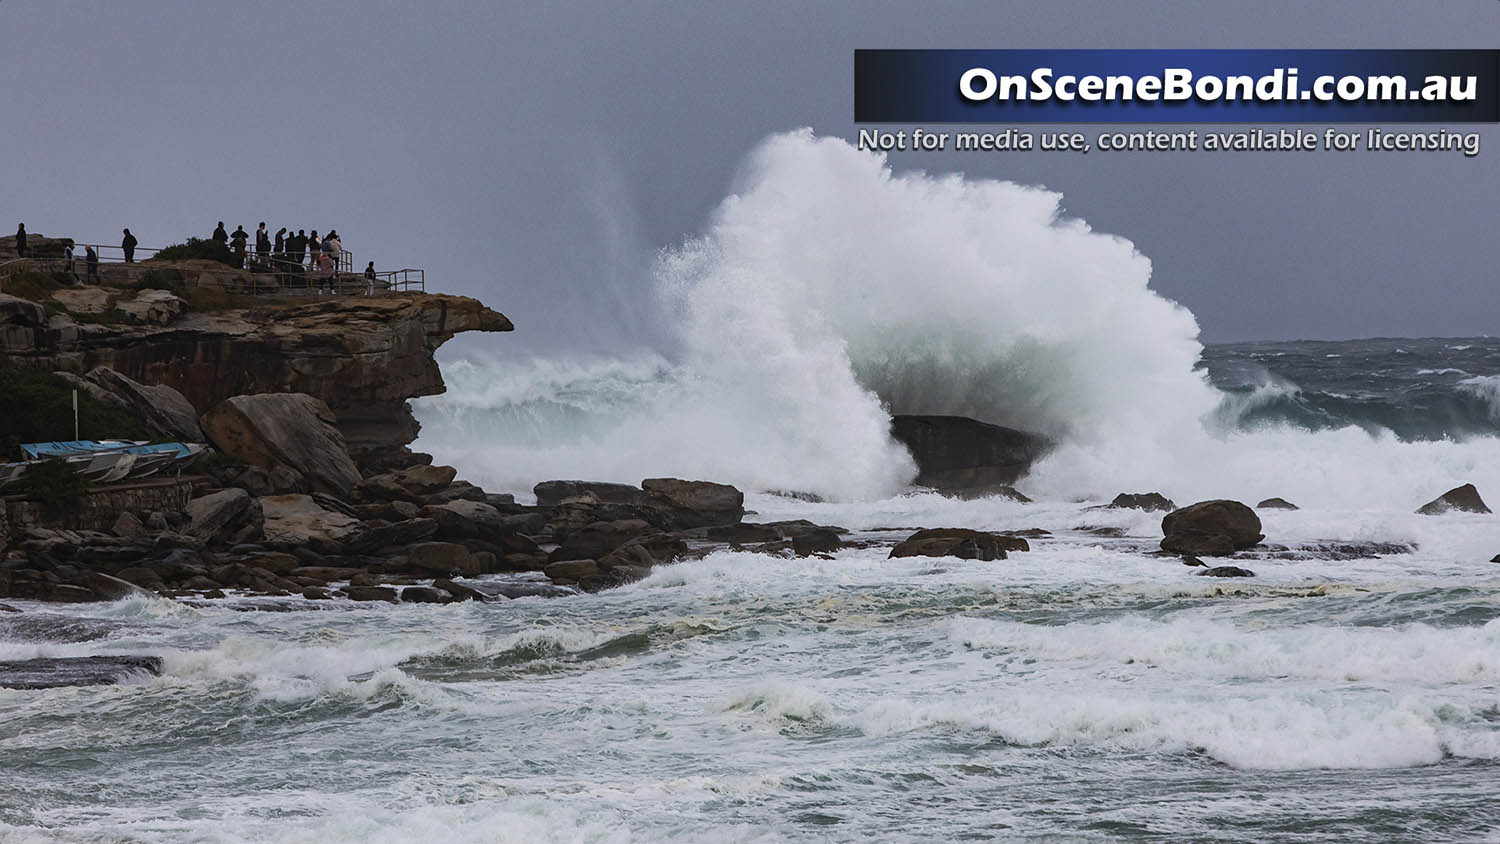 Huge waves impact the east coast of NSW with some daring to take them on at Bondi Beach